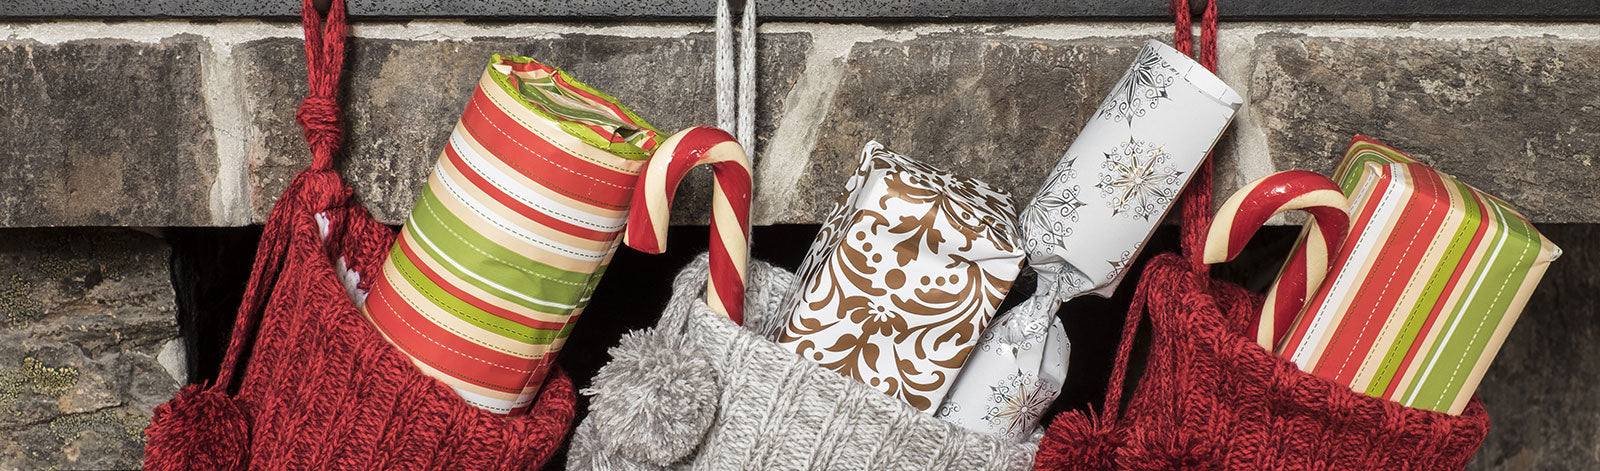 Stocking Stuffers for Women Under $20 (that they will actually use